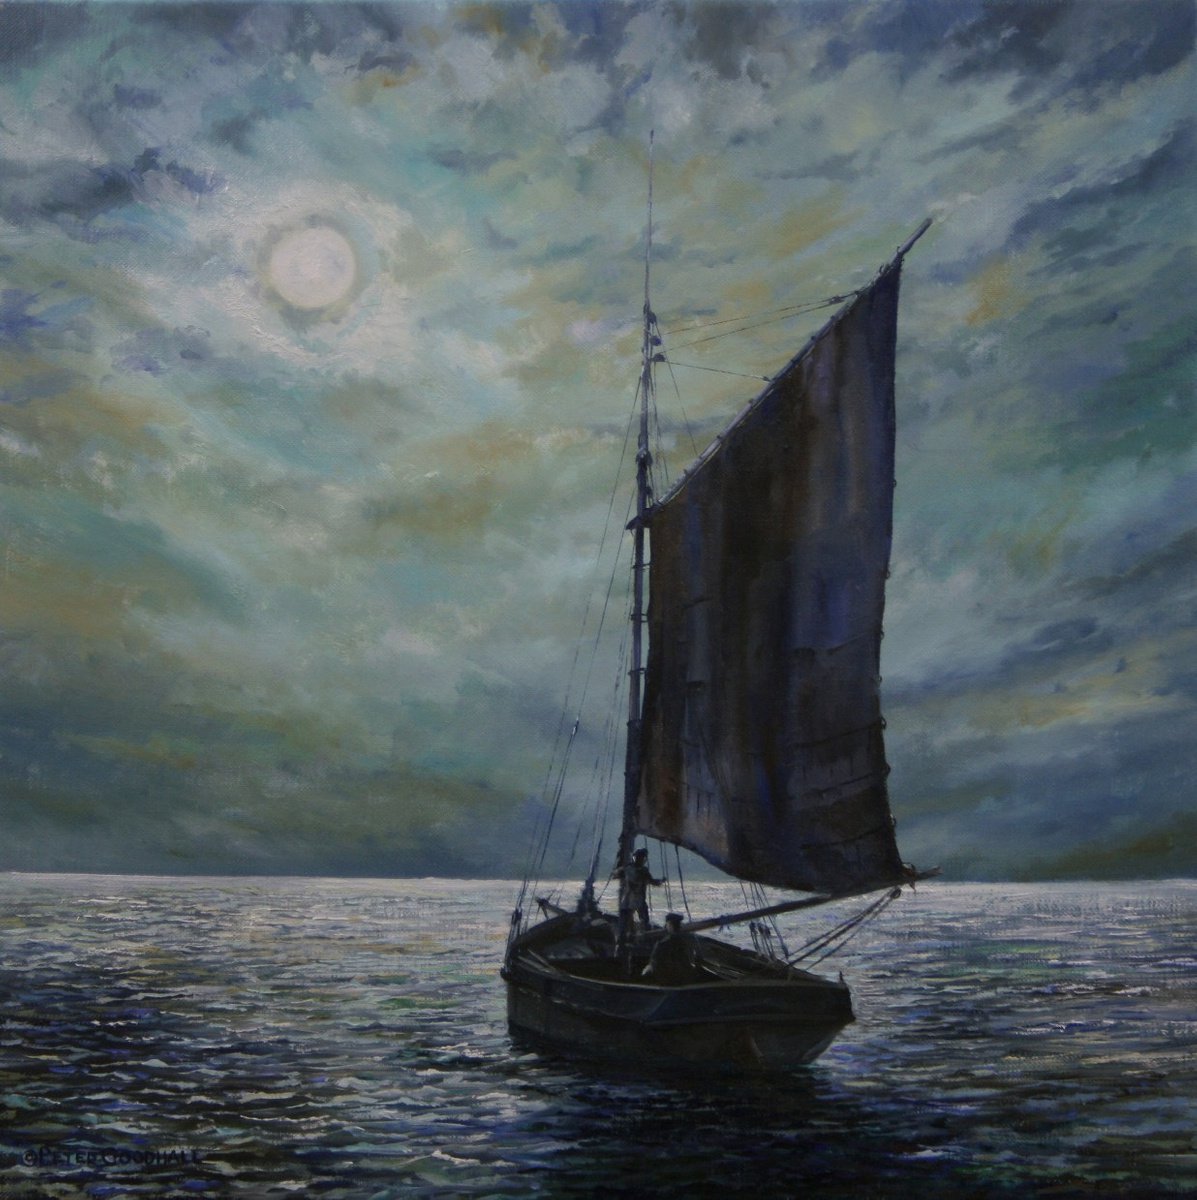 SAILING IN THE MOONLIGHT by Peter Goodhall